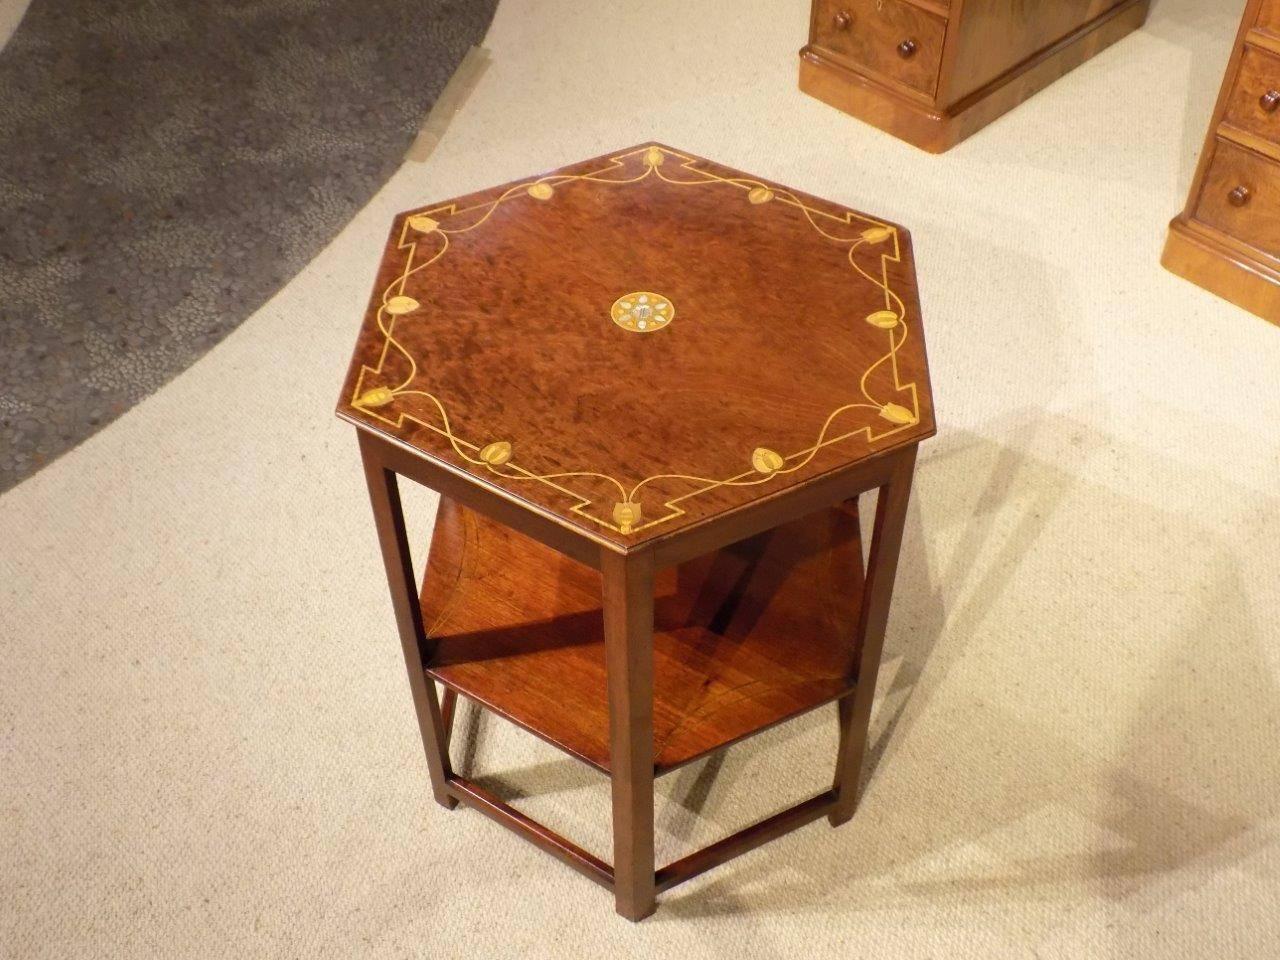 A mahogany Arts & Crafts period hexagonal inlaid table by Shapland & Petter of Barnstaple. Having a hexagonal top in solid plum pudding mahogany with a central marquetry mother-of-pearl inlaid roundel and a stylised floral marquetry inlaid